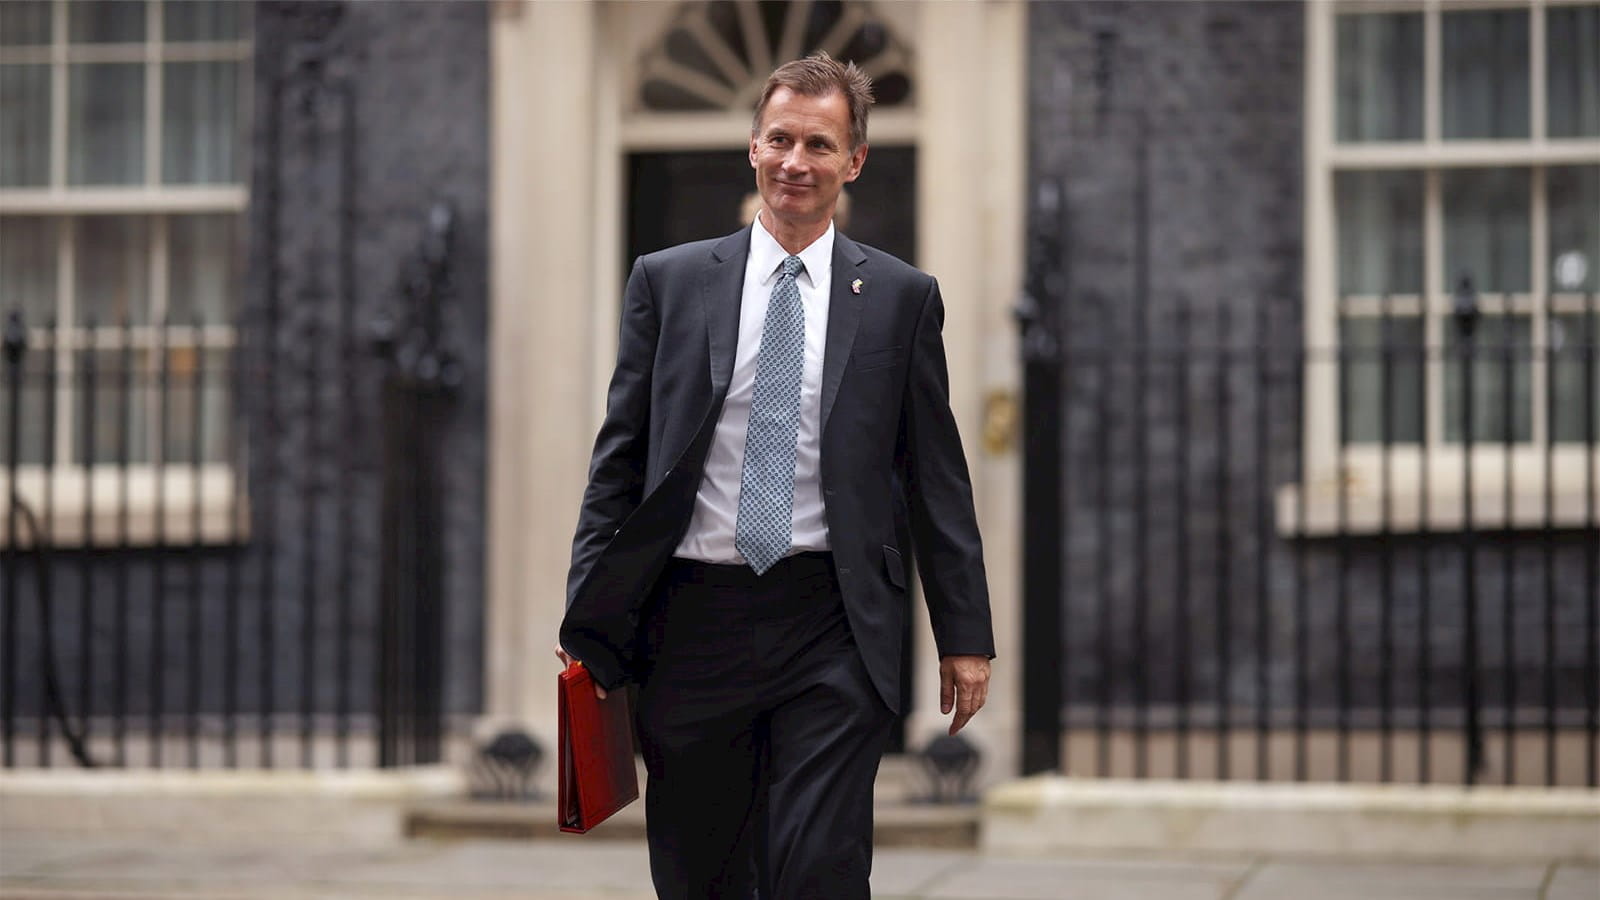 ICAEW Taxline budget Jeremy Hunt Chancellor Exchequer government Downing Street